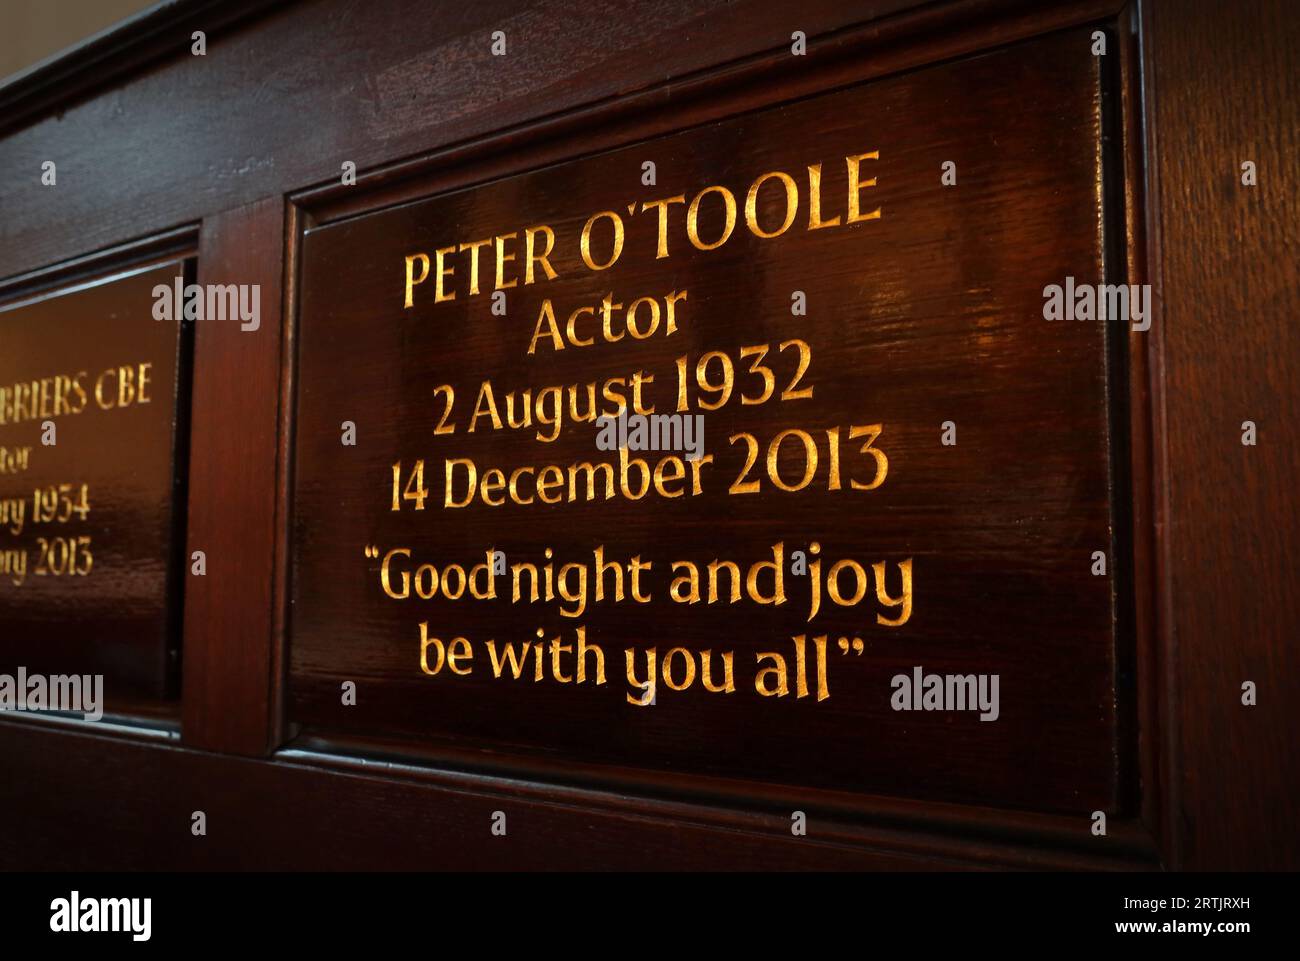 Peter O'Toole memorial 1932-2013 at St Pauls, The Actors Church, Bedford St, Covent Garden, London, England, UK, WC2E 9ED Stock Photo